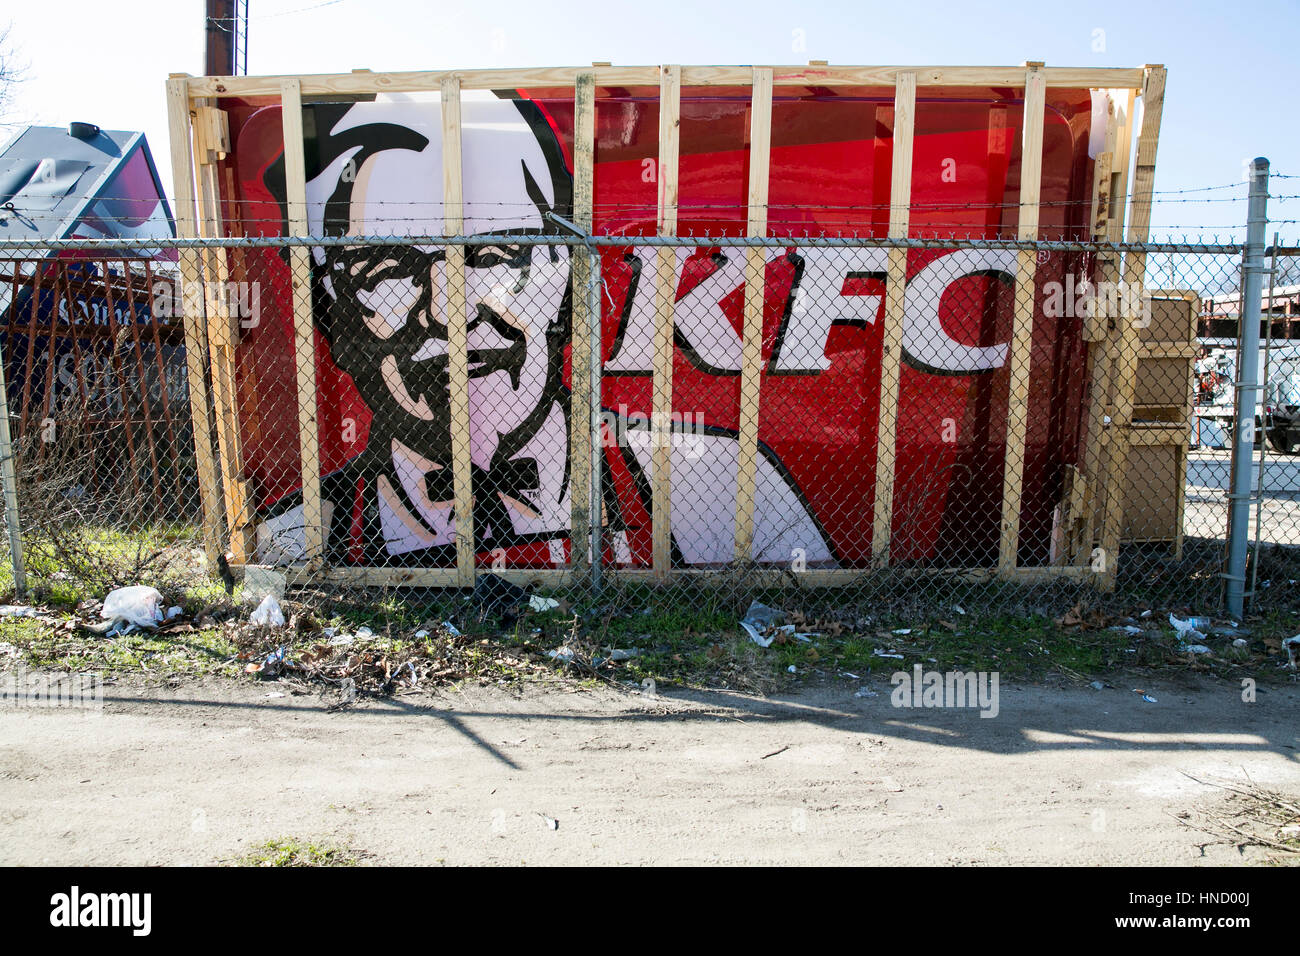 A Kentucky Fried Chicken (KFC) restaurant sign leaning against a fence in Memphis, Tennessee on February 5, 2017. Stock Photo